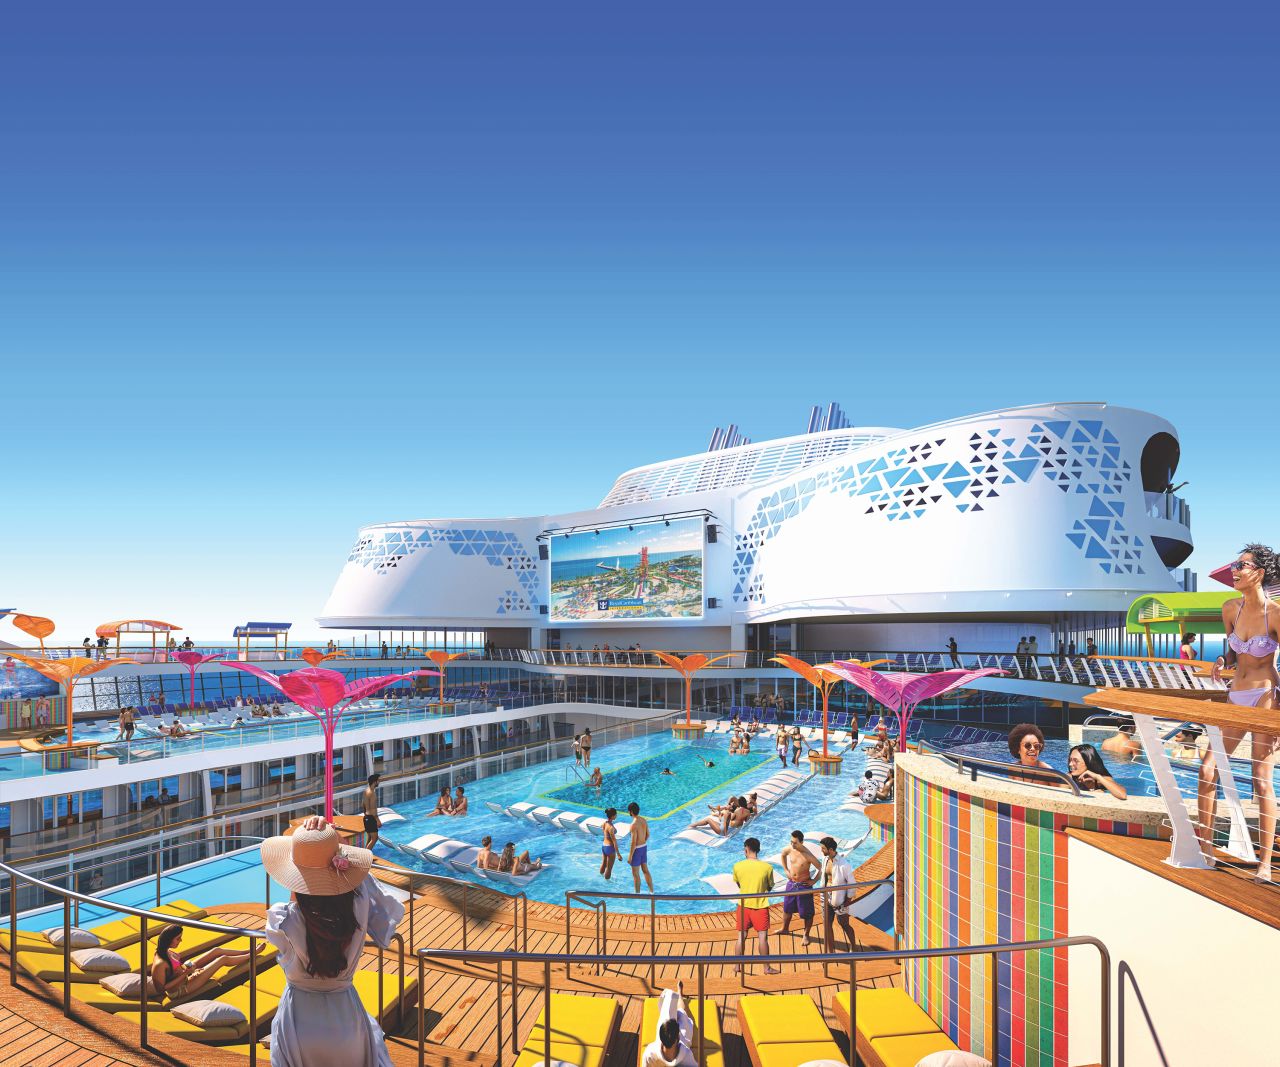 <strong>Welcome addition: </strong>"We're excited to introduce guests across the world to Wonder of the Seas and its world-class features after a six-year-long process," Mark Tamis, senior vice president of hotel operations at  Royal Caribbean International tells CNN Travel. This rendering of the pool deck shows what life could be like on board Wonder of the Seas.